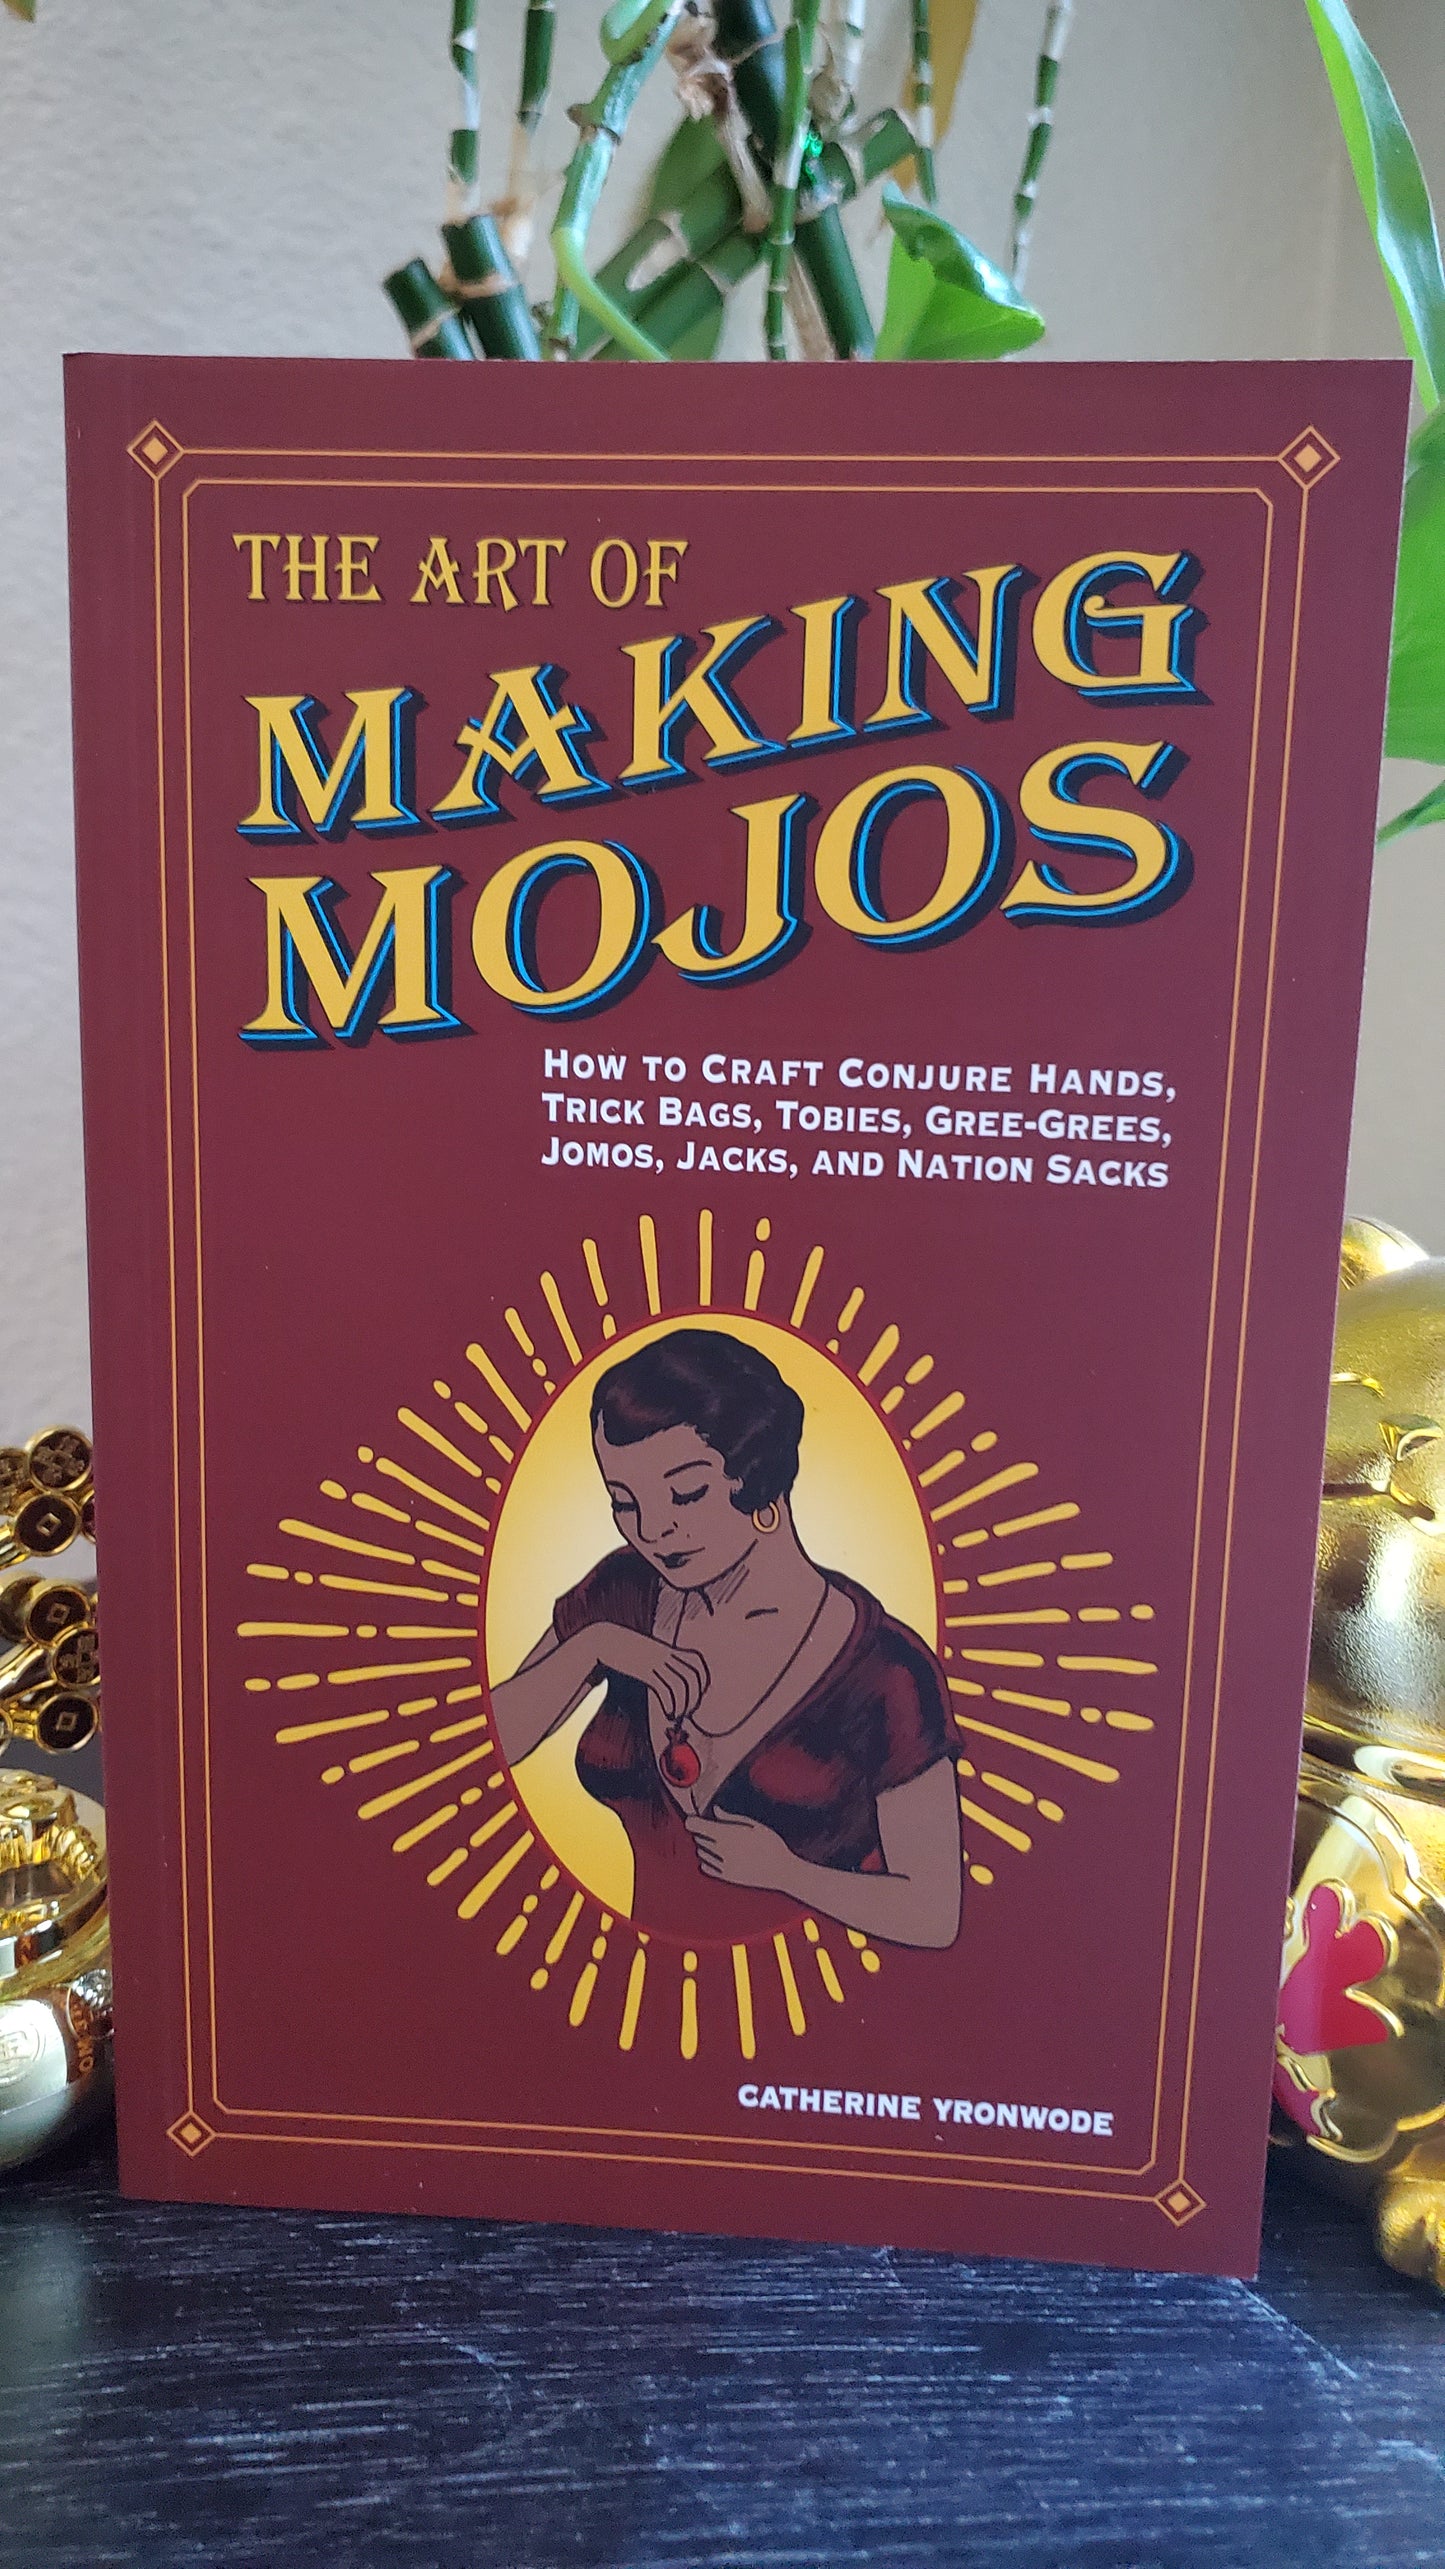 The Art of Making Mojos #MustHave #Hoodoo By Catherine Yronwode #MojoBags #Conjure